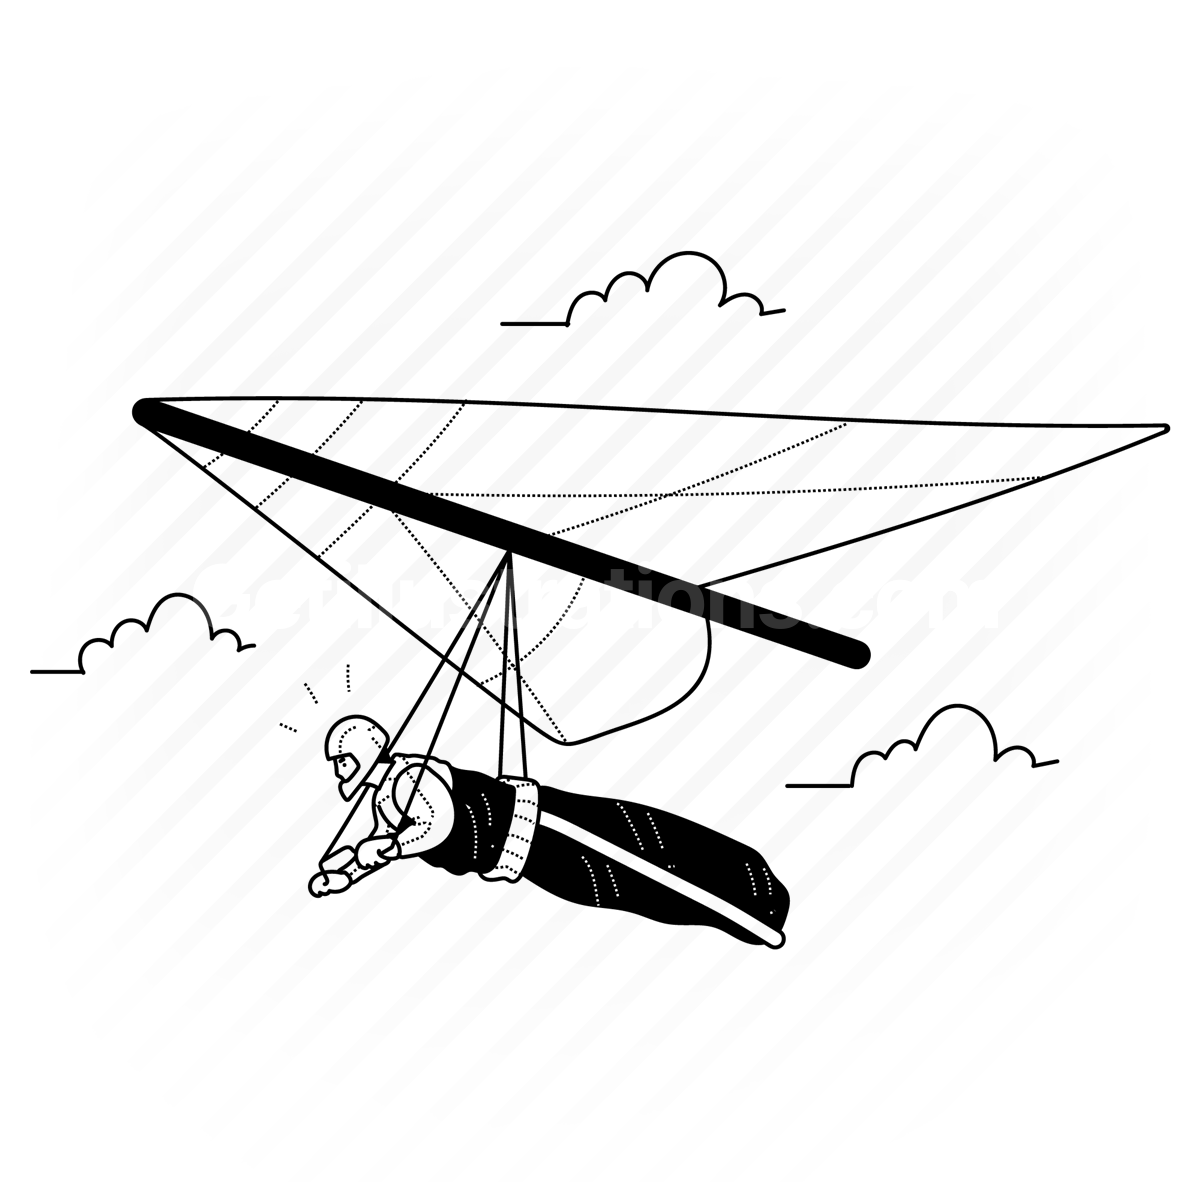 hang gliding, hang glider, sport, activity, outdoors, wind gliding